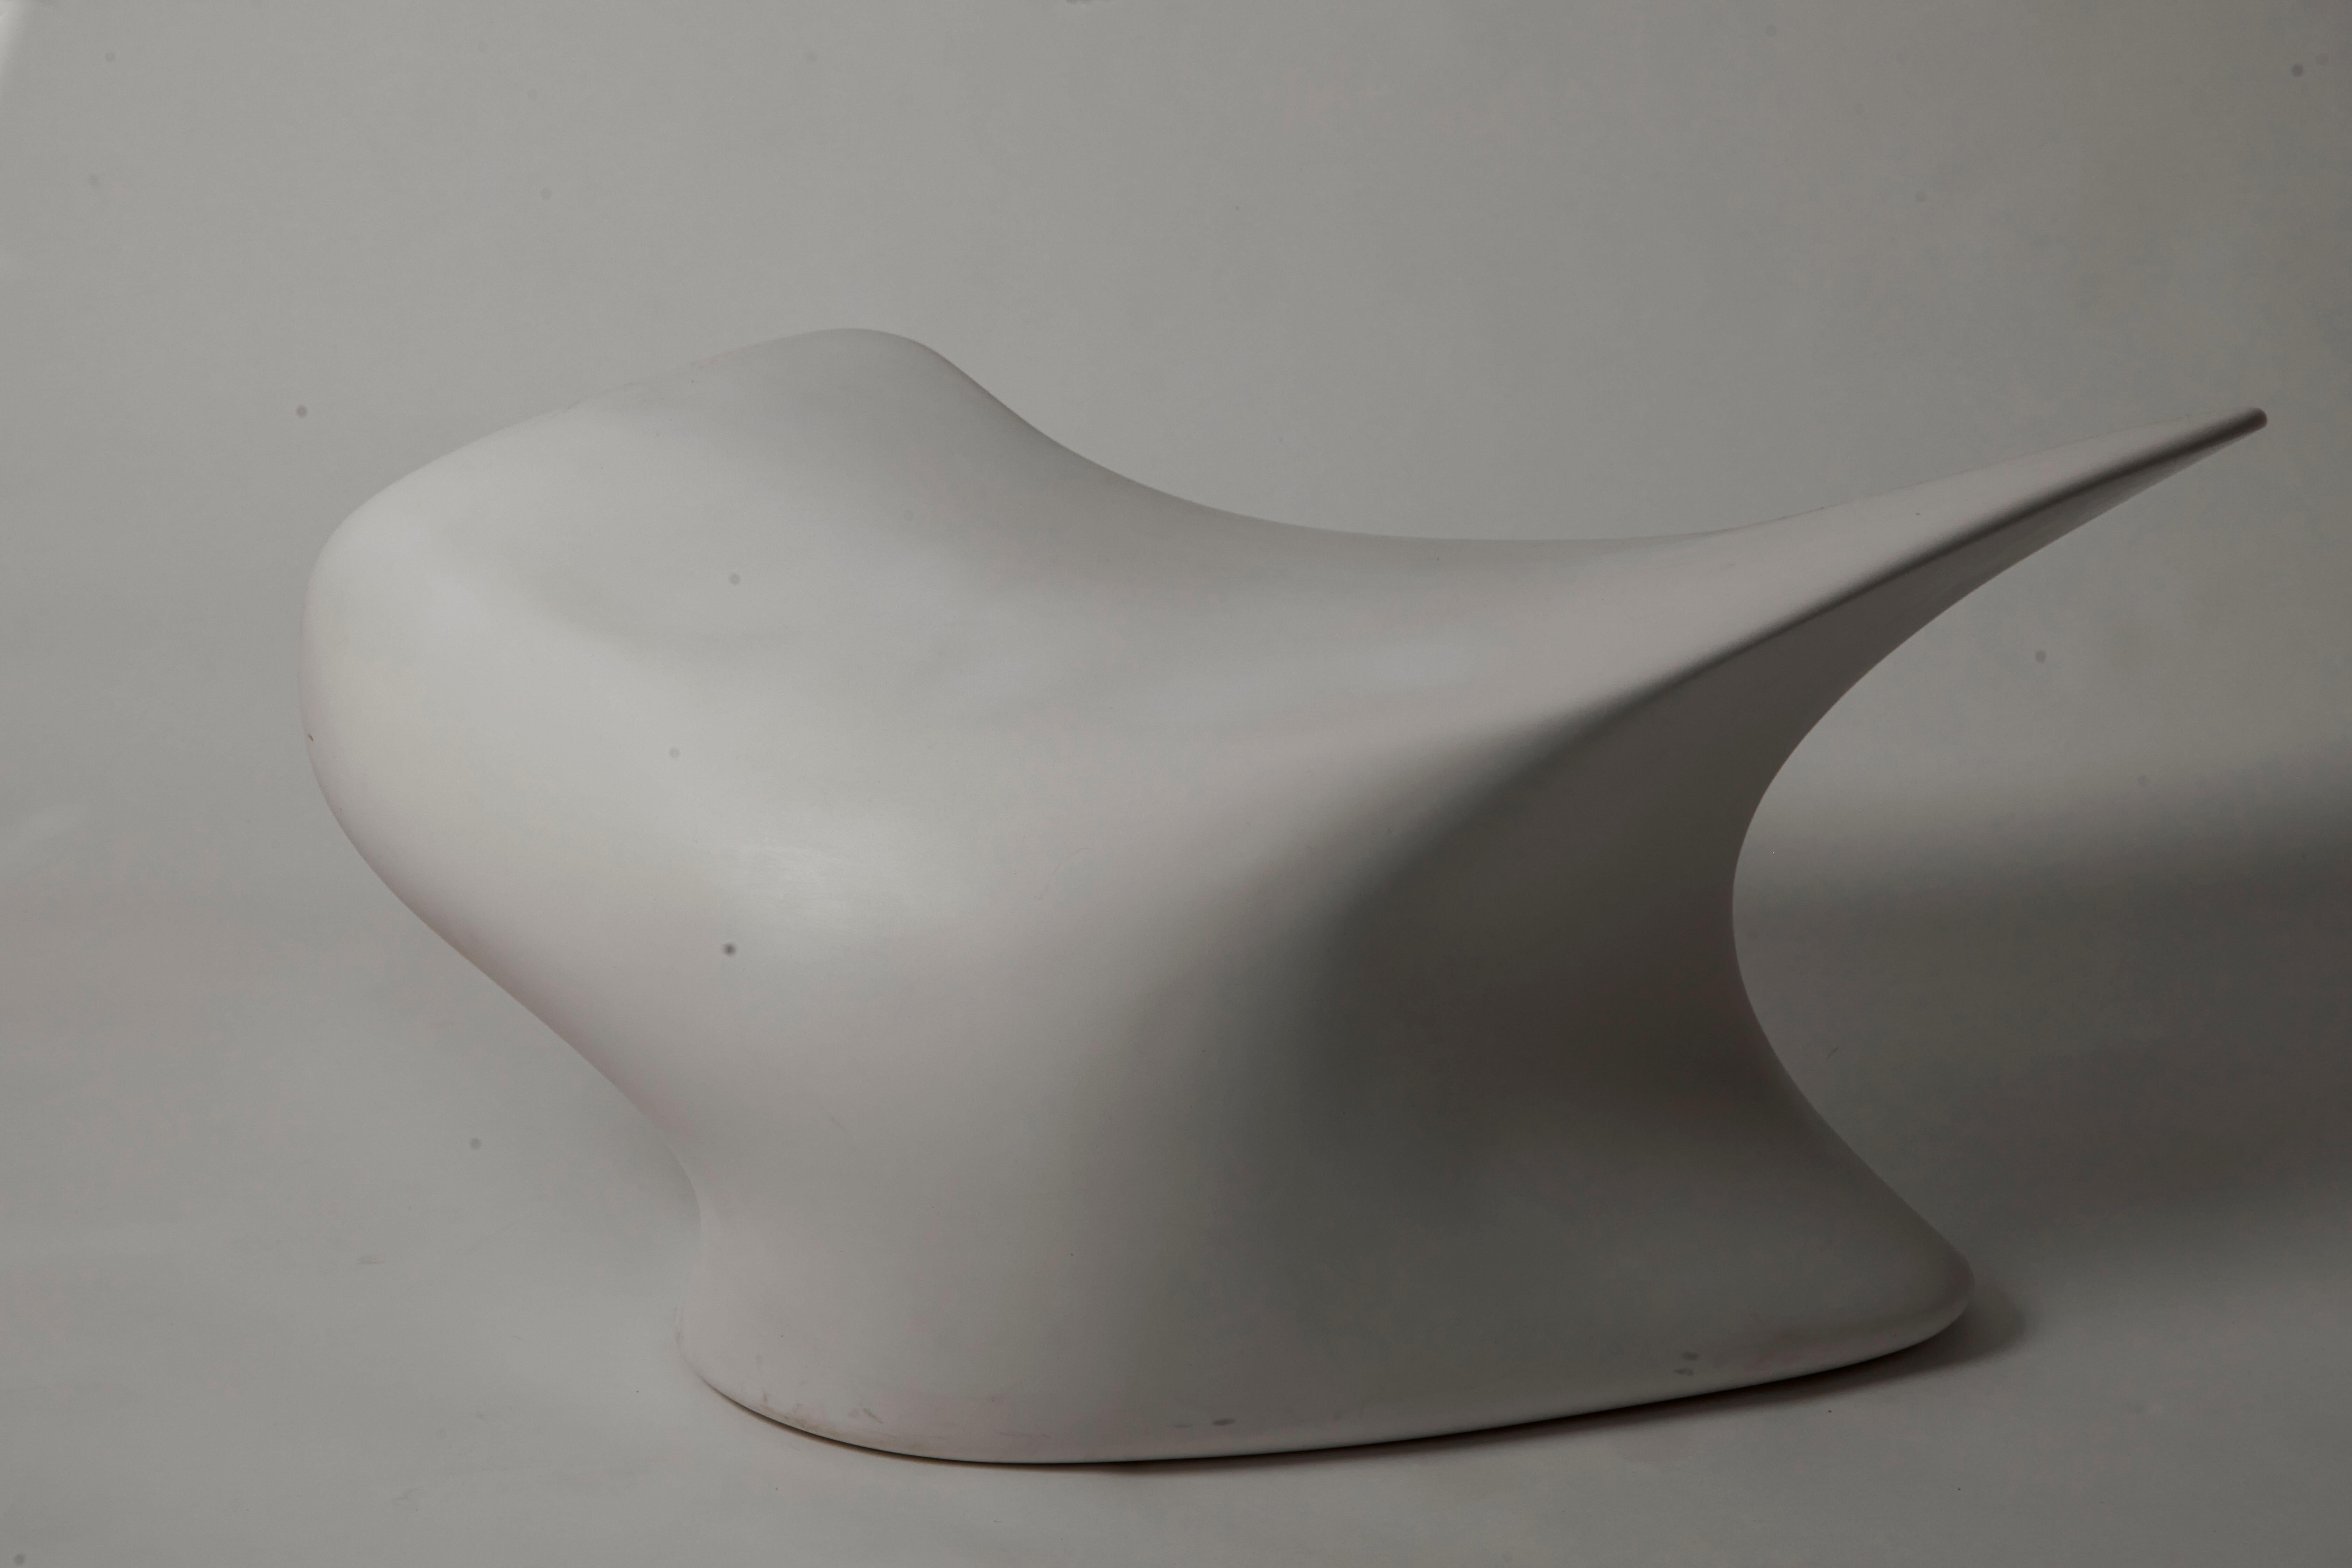 With the unmistakable flowing aesthetic of the late architect Zaha Hadid, the curvaceous Nekton Bench creates a sense of continuity through any space.